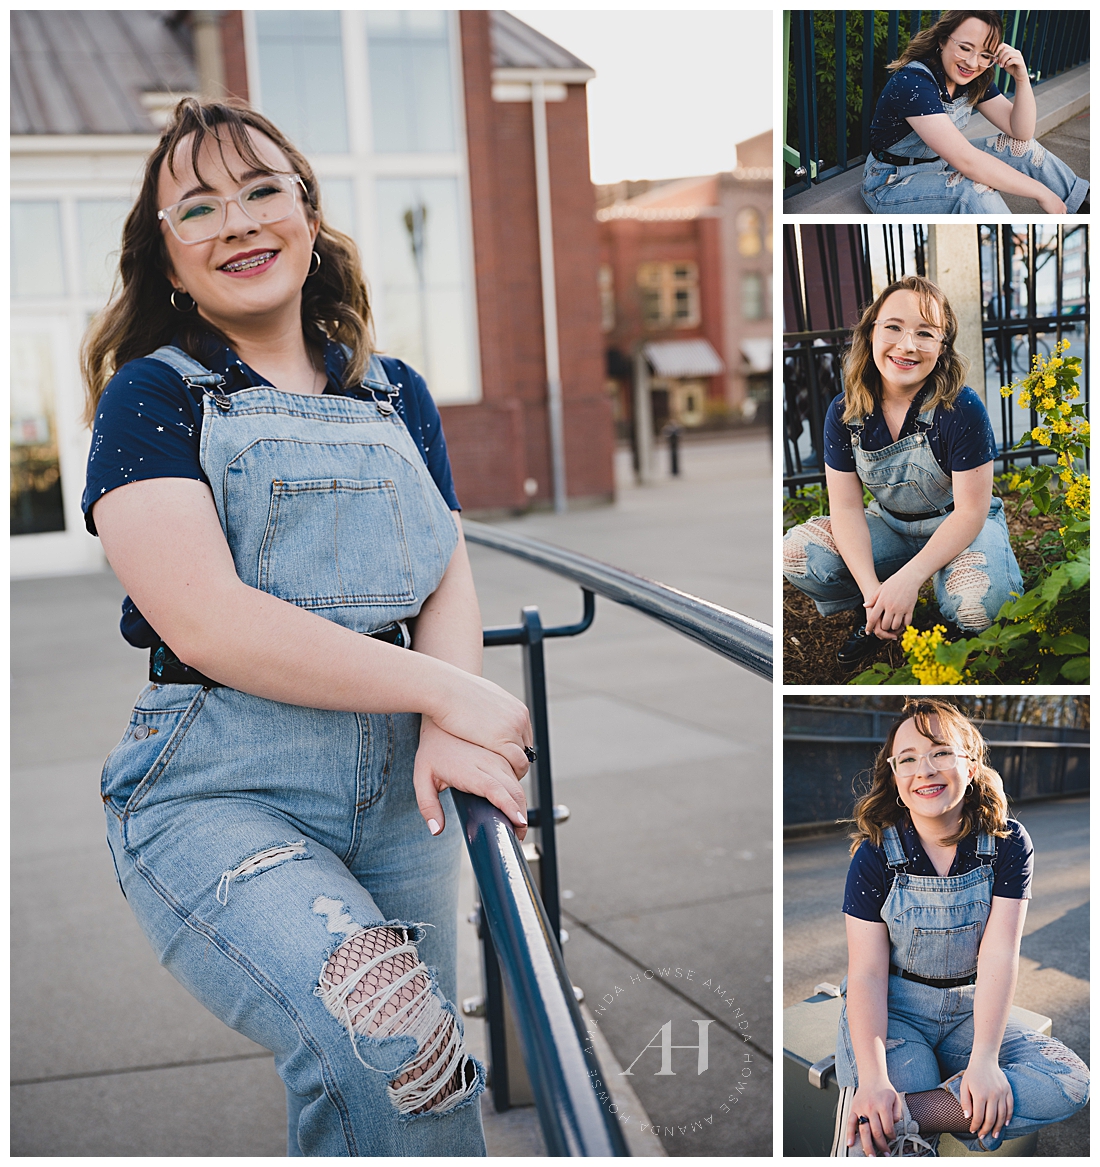 Outdoor Senior Portraits in Tacoma | Cute Portraits for Seniors | Photographed by the Best Tacoma Senior Photographer Amanda Howse Photography 